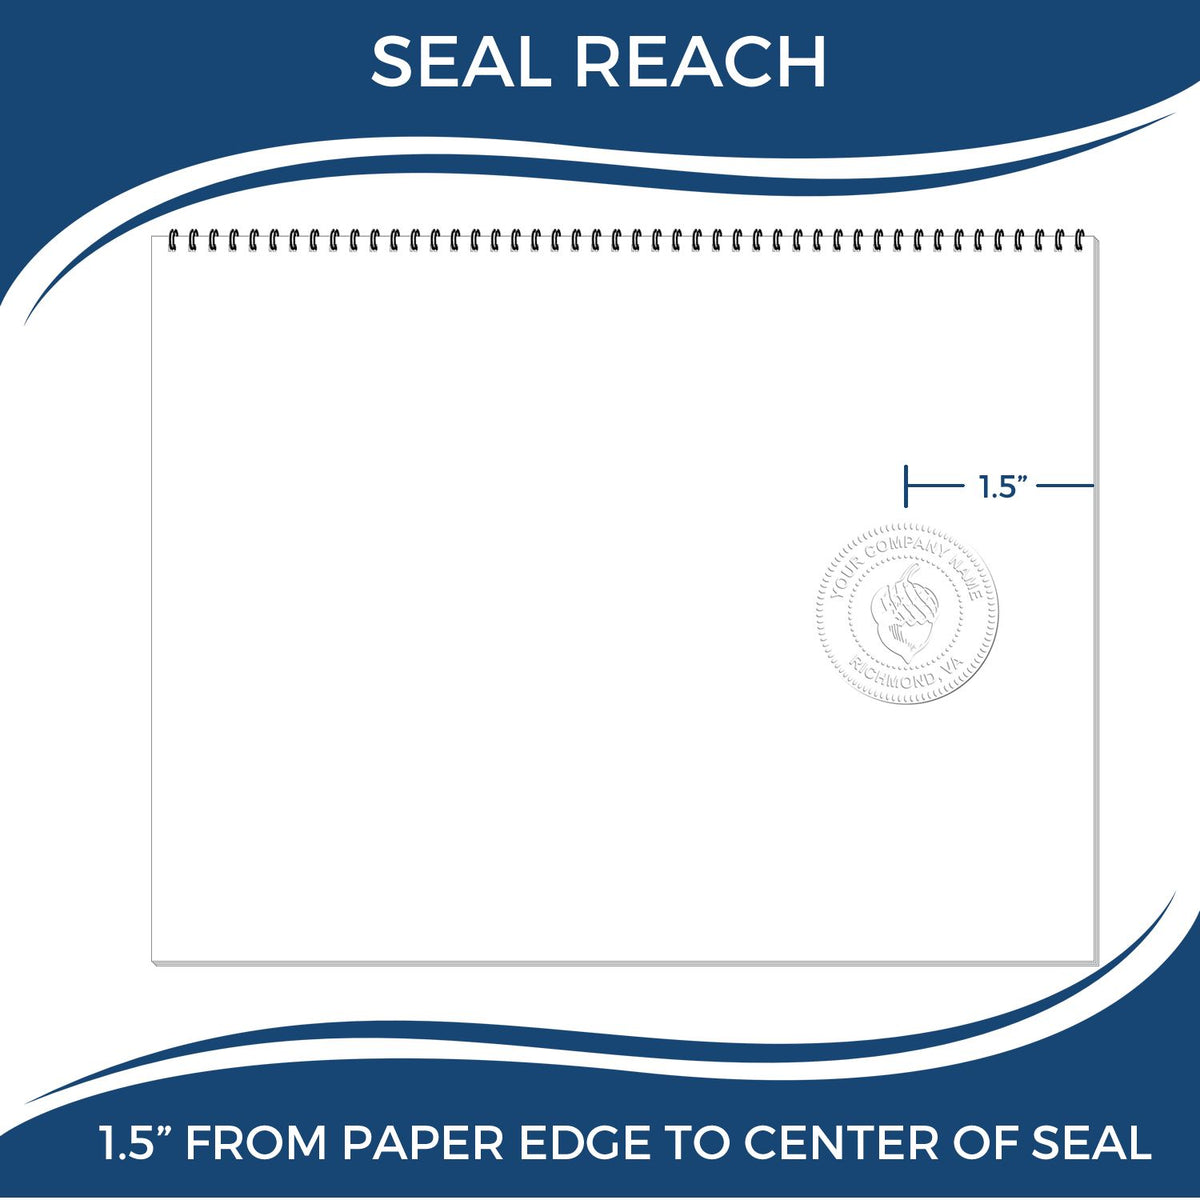 An infographic showing the seal reach which is represented by a ruler and a miniature seal image of the Soft West Virginia Professional Engineer Seal